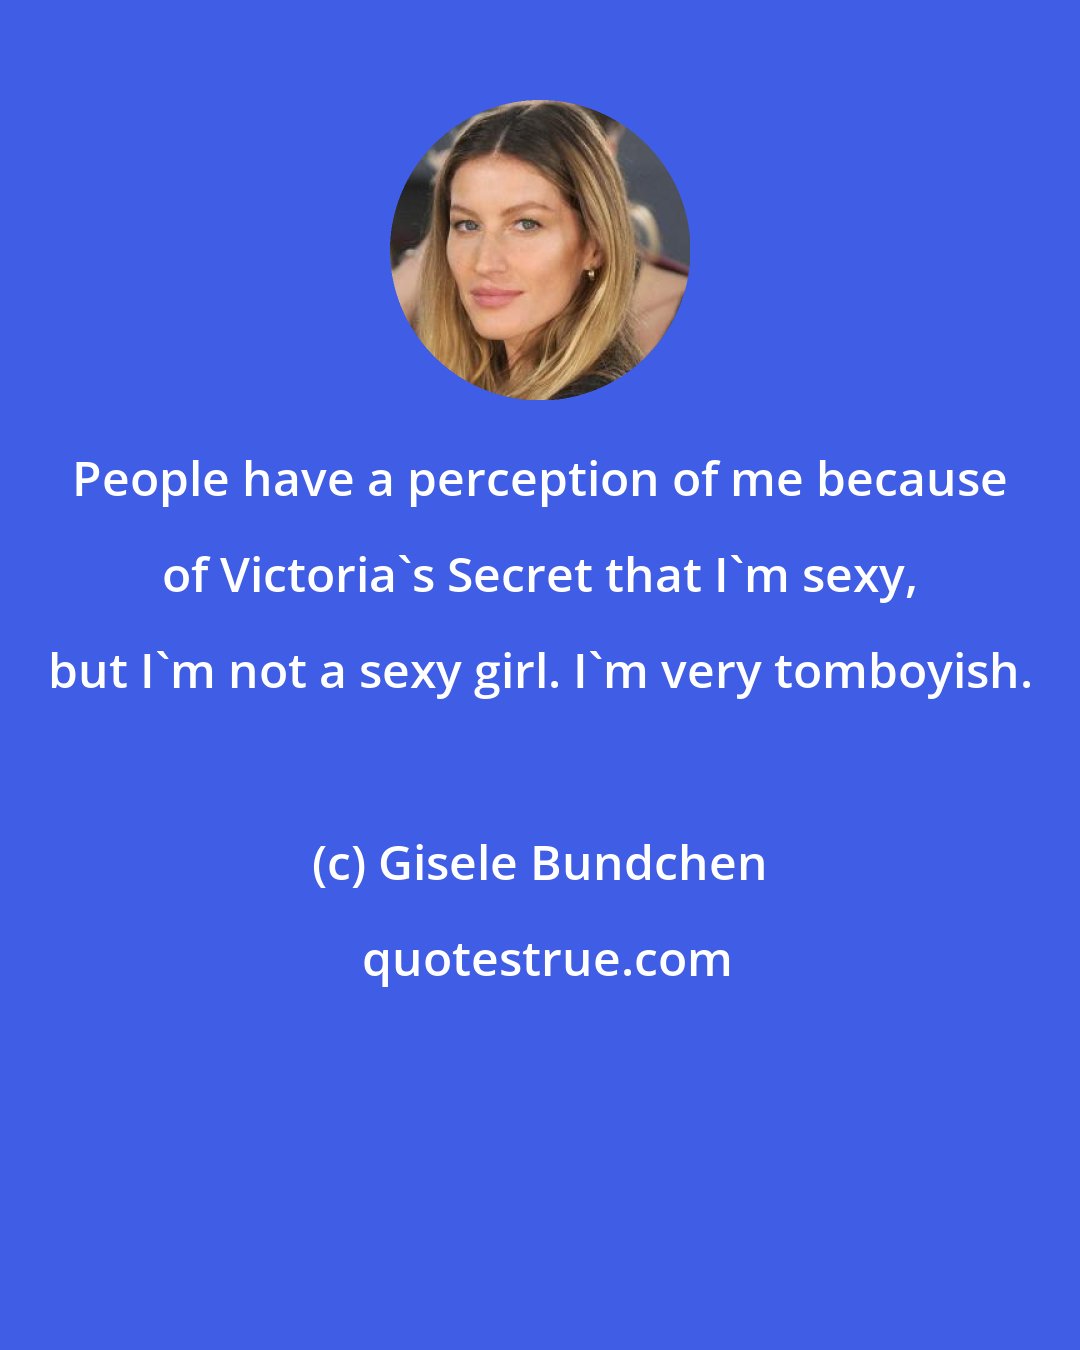 Gisele Bundchen: People have a perception of me because of Victoria's Secret that I'm sexy, but I'm not a sexy girl. I'm very tomboyish.